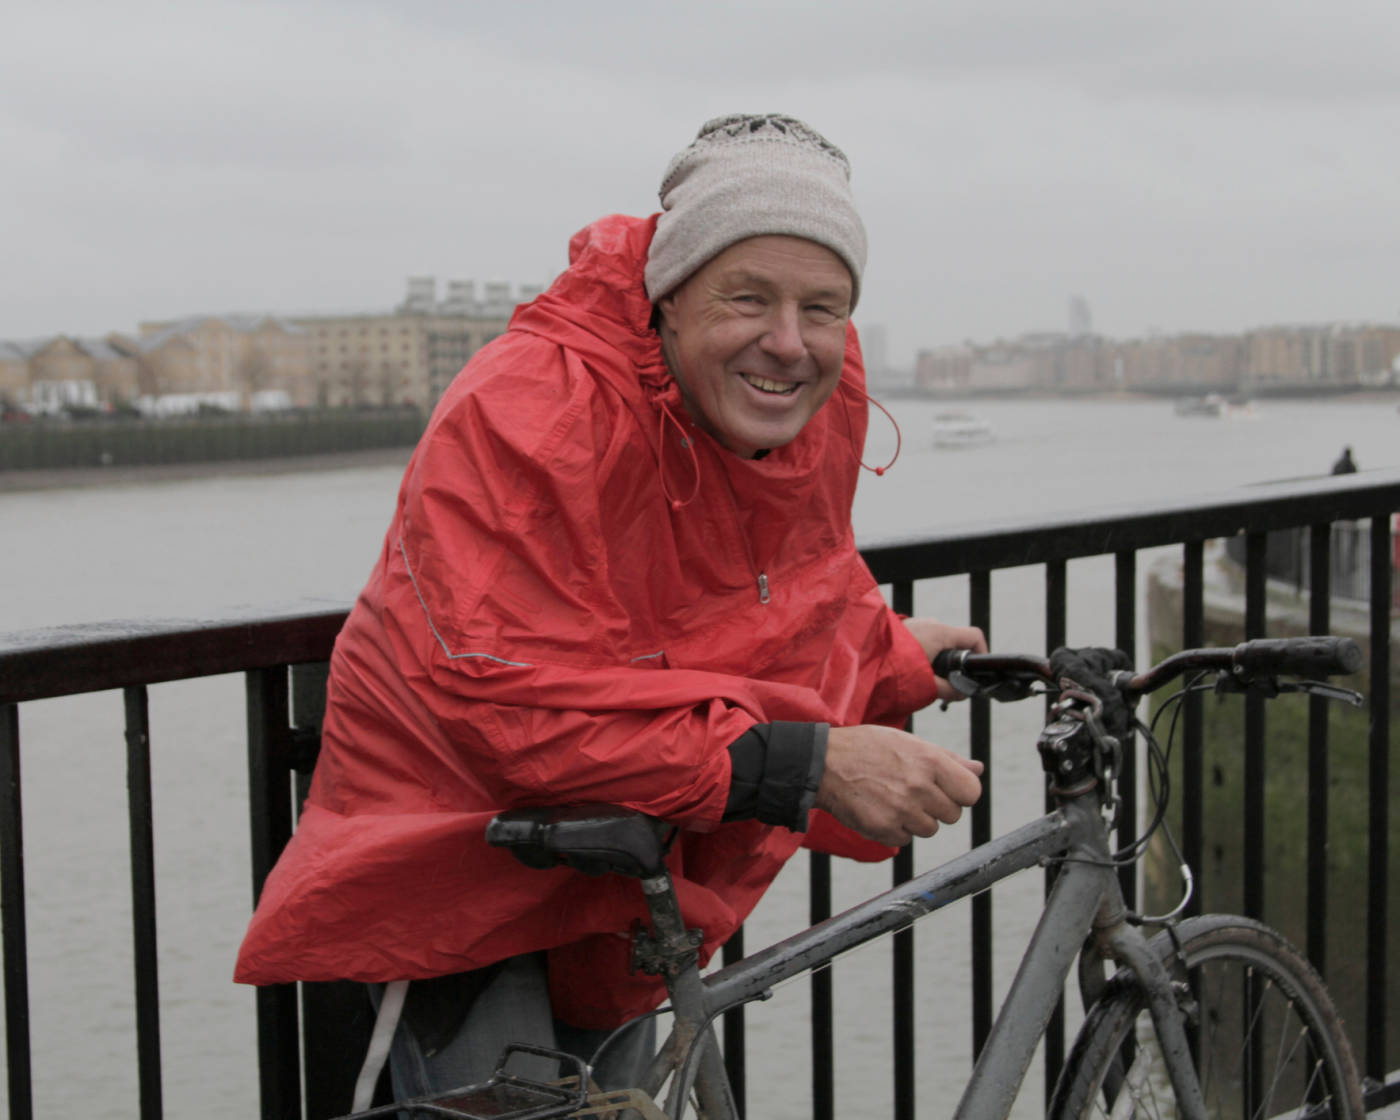 Man wearing a raincoat standing in the rain by his bike